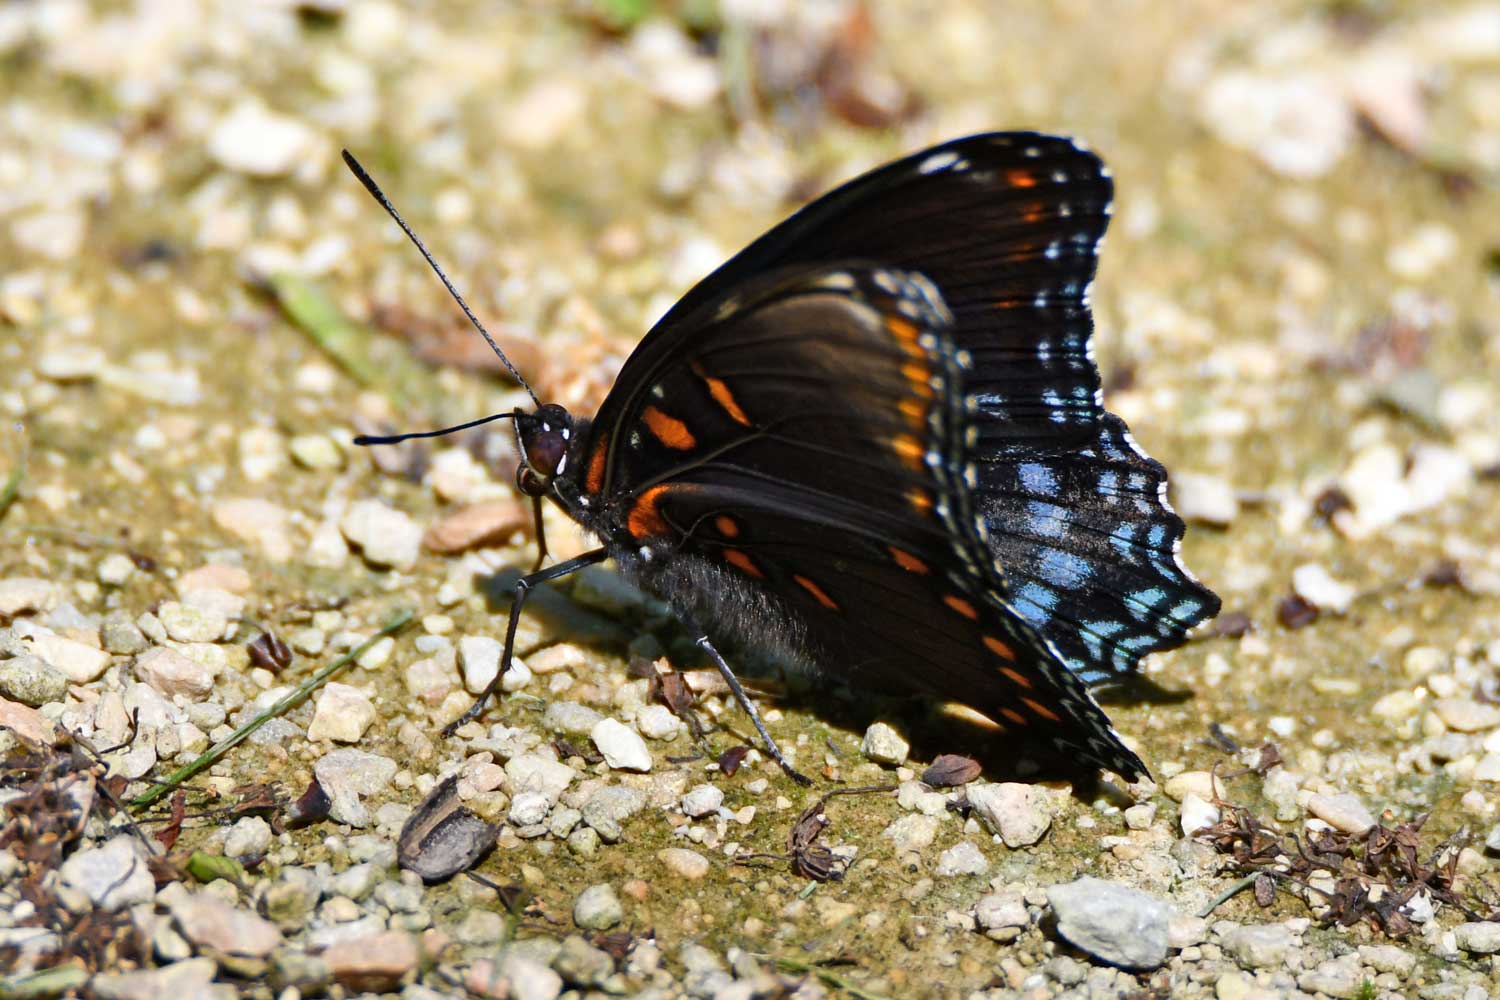 Red spotted admiral butterfly on a trail.